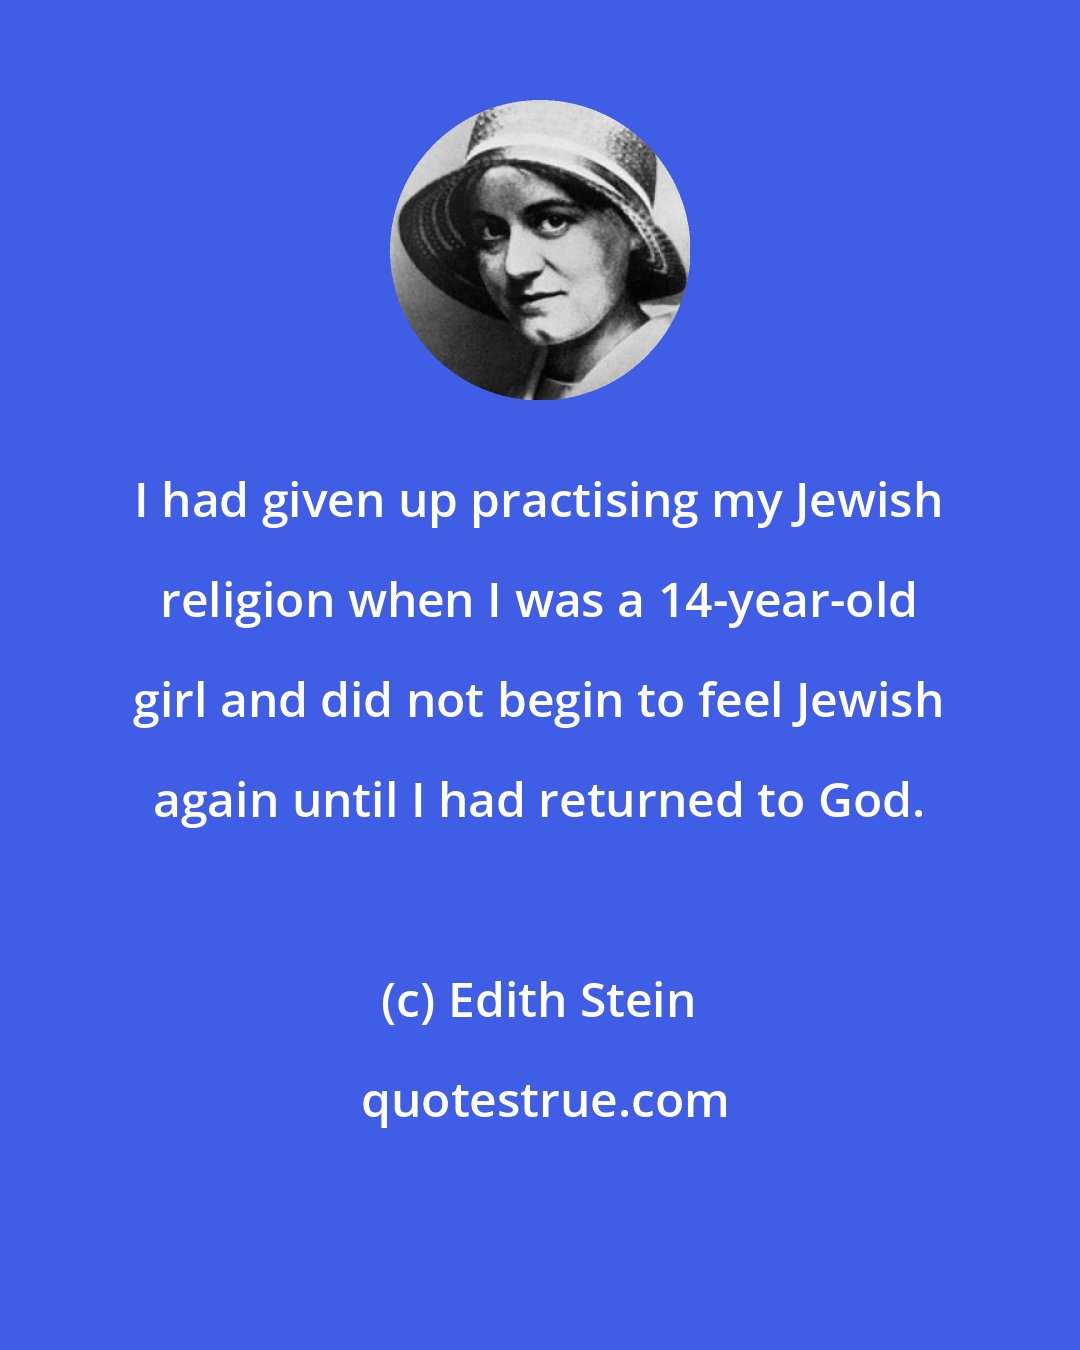 Edith Stein: I had given up practising my Jewish religion when I was a 14-year-old girl and did not begin to feel Jewish again until I had returned to God.